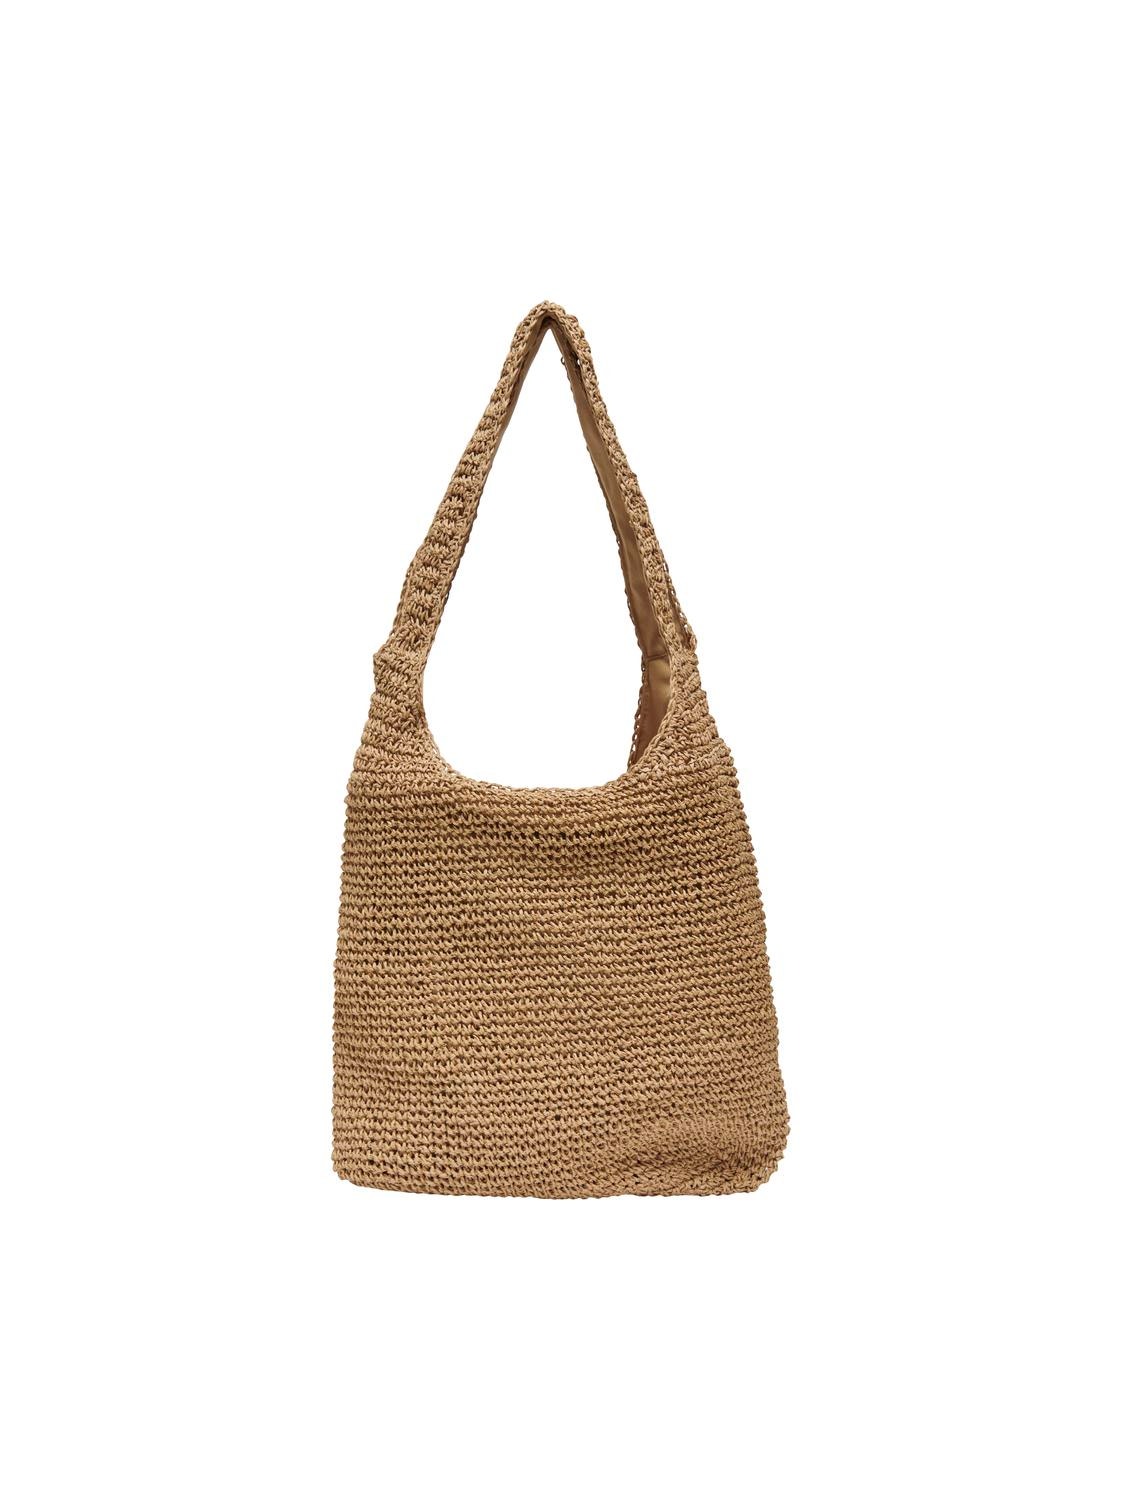 ONLY Straw shoulderbag -White Pepper - 15318269